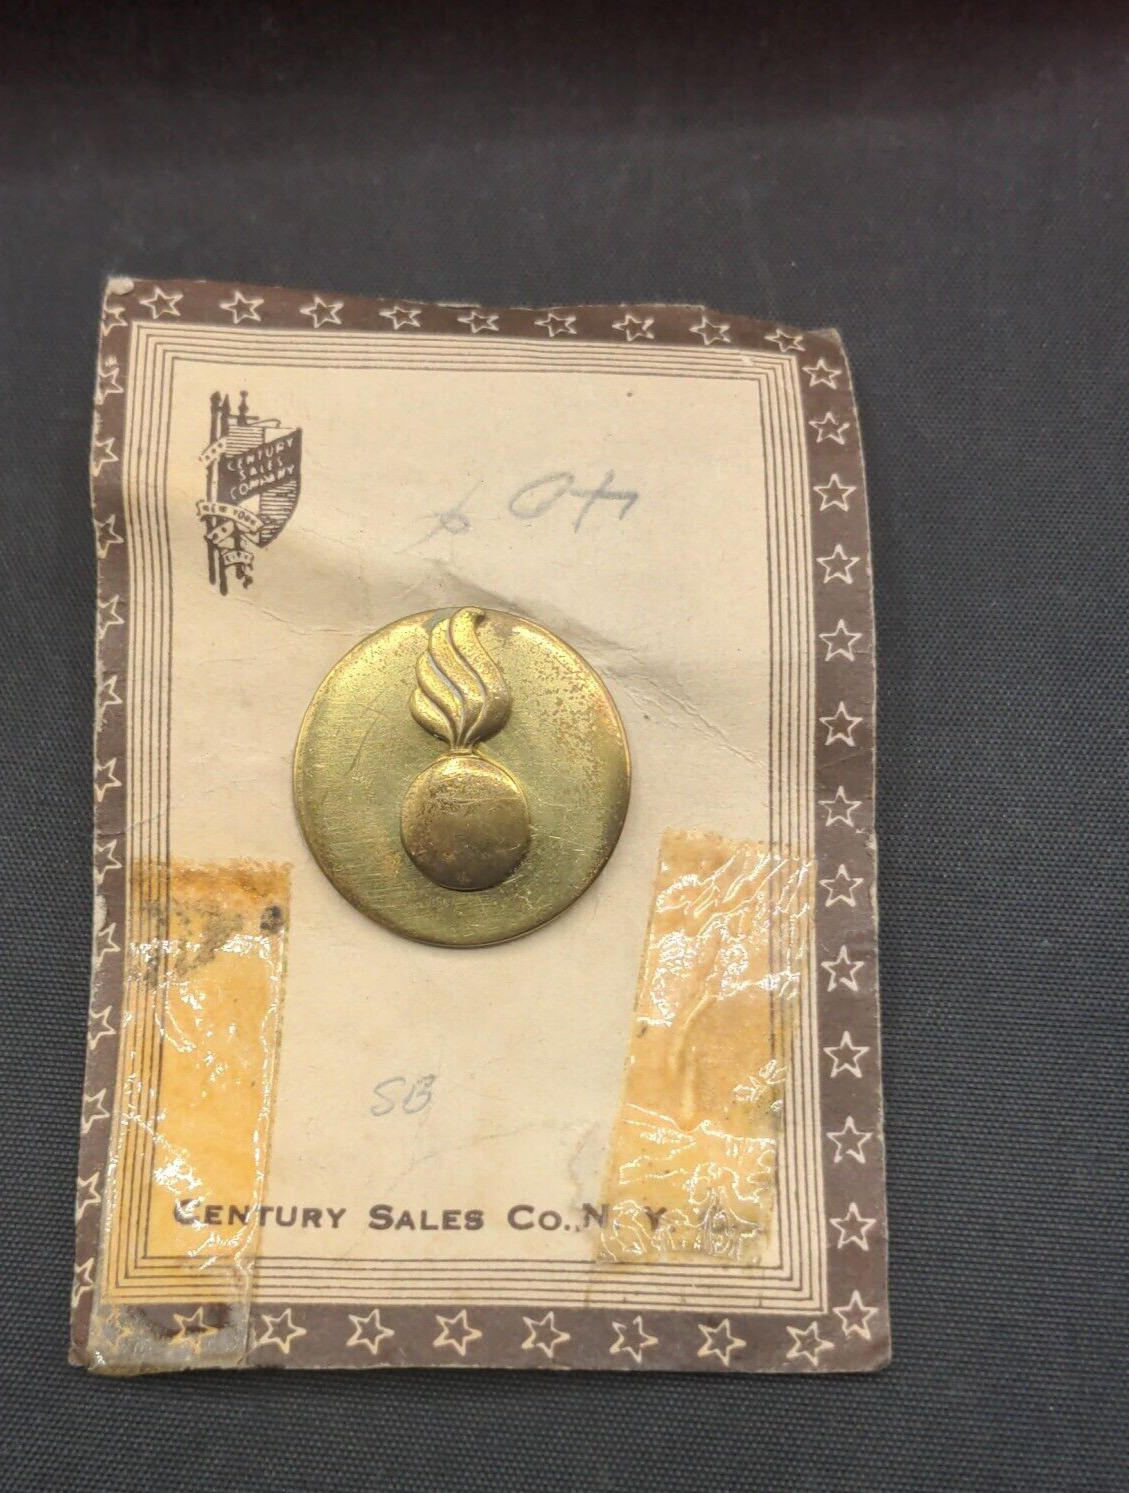 WWII/2 US Army Ordnance enlisted screw-back collar brass on the card